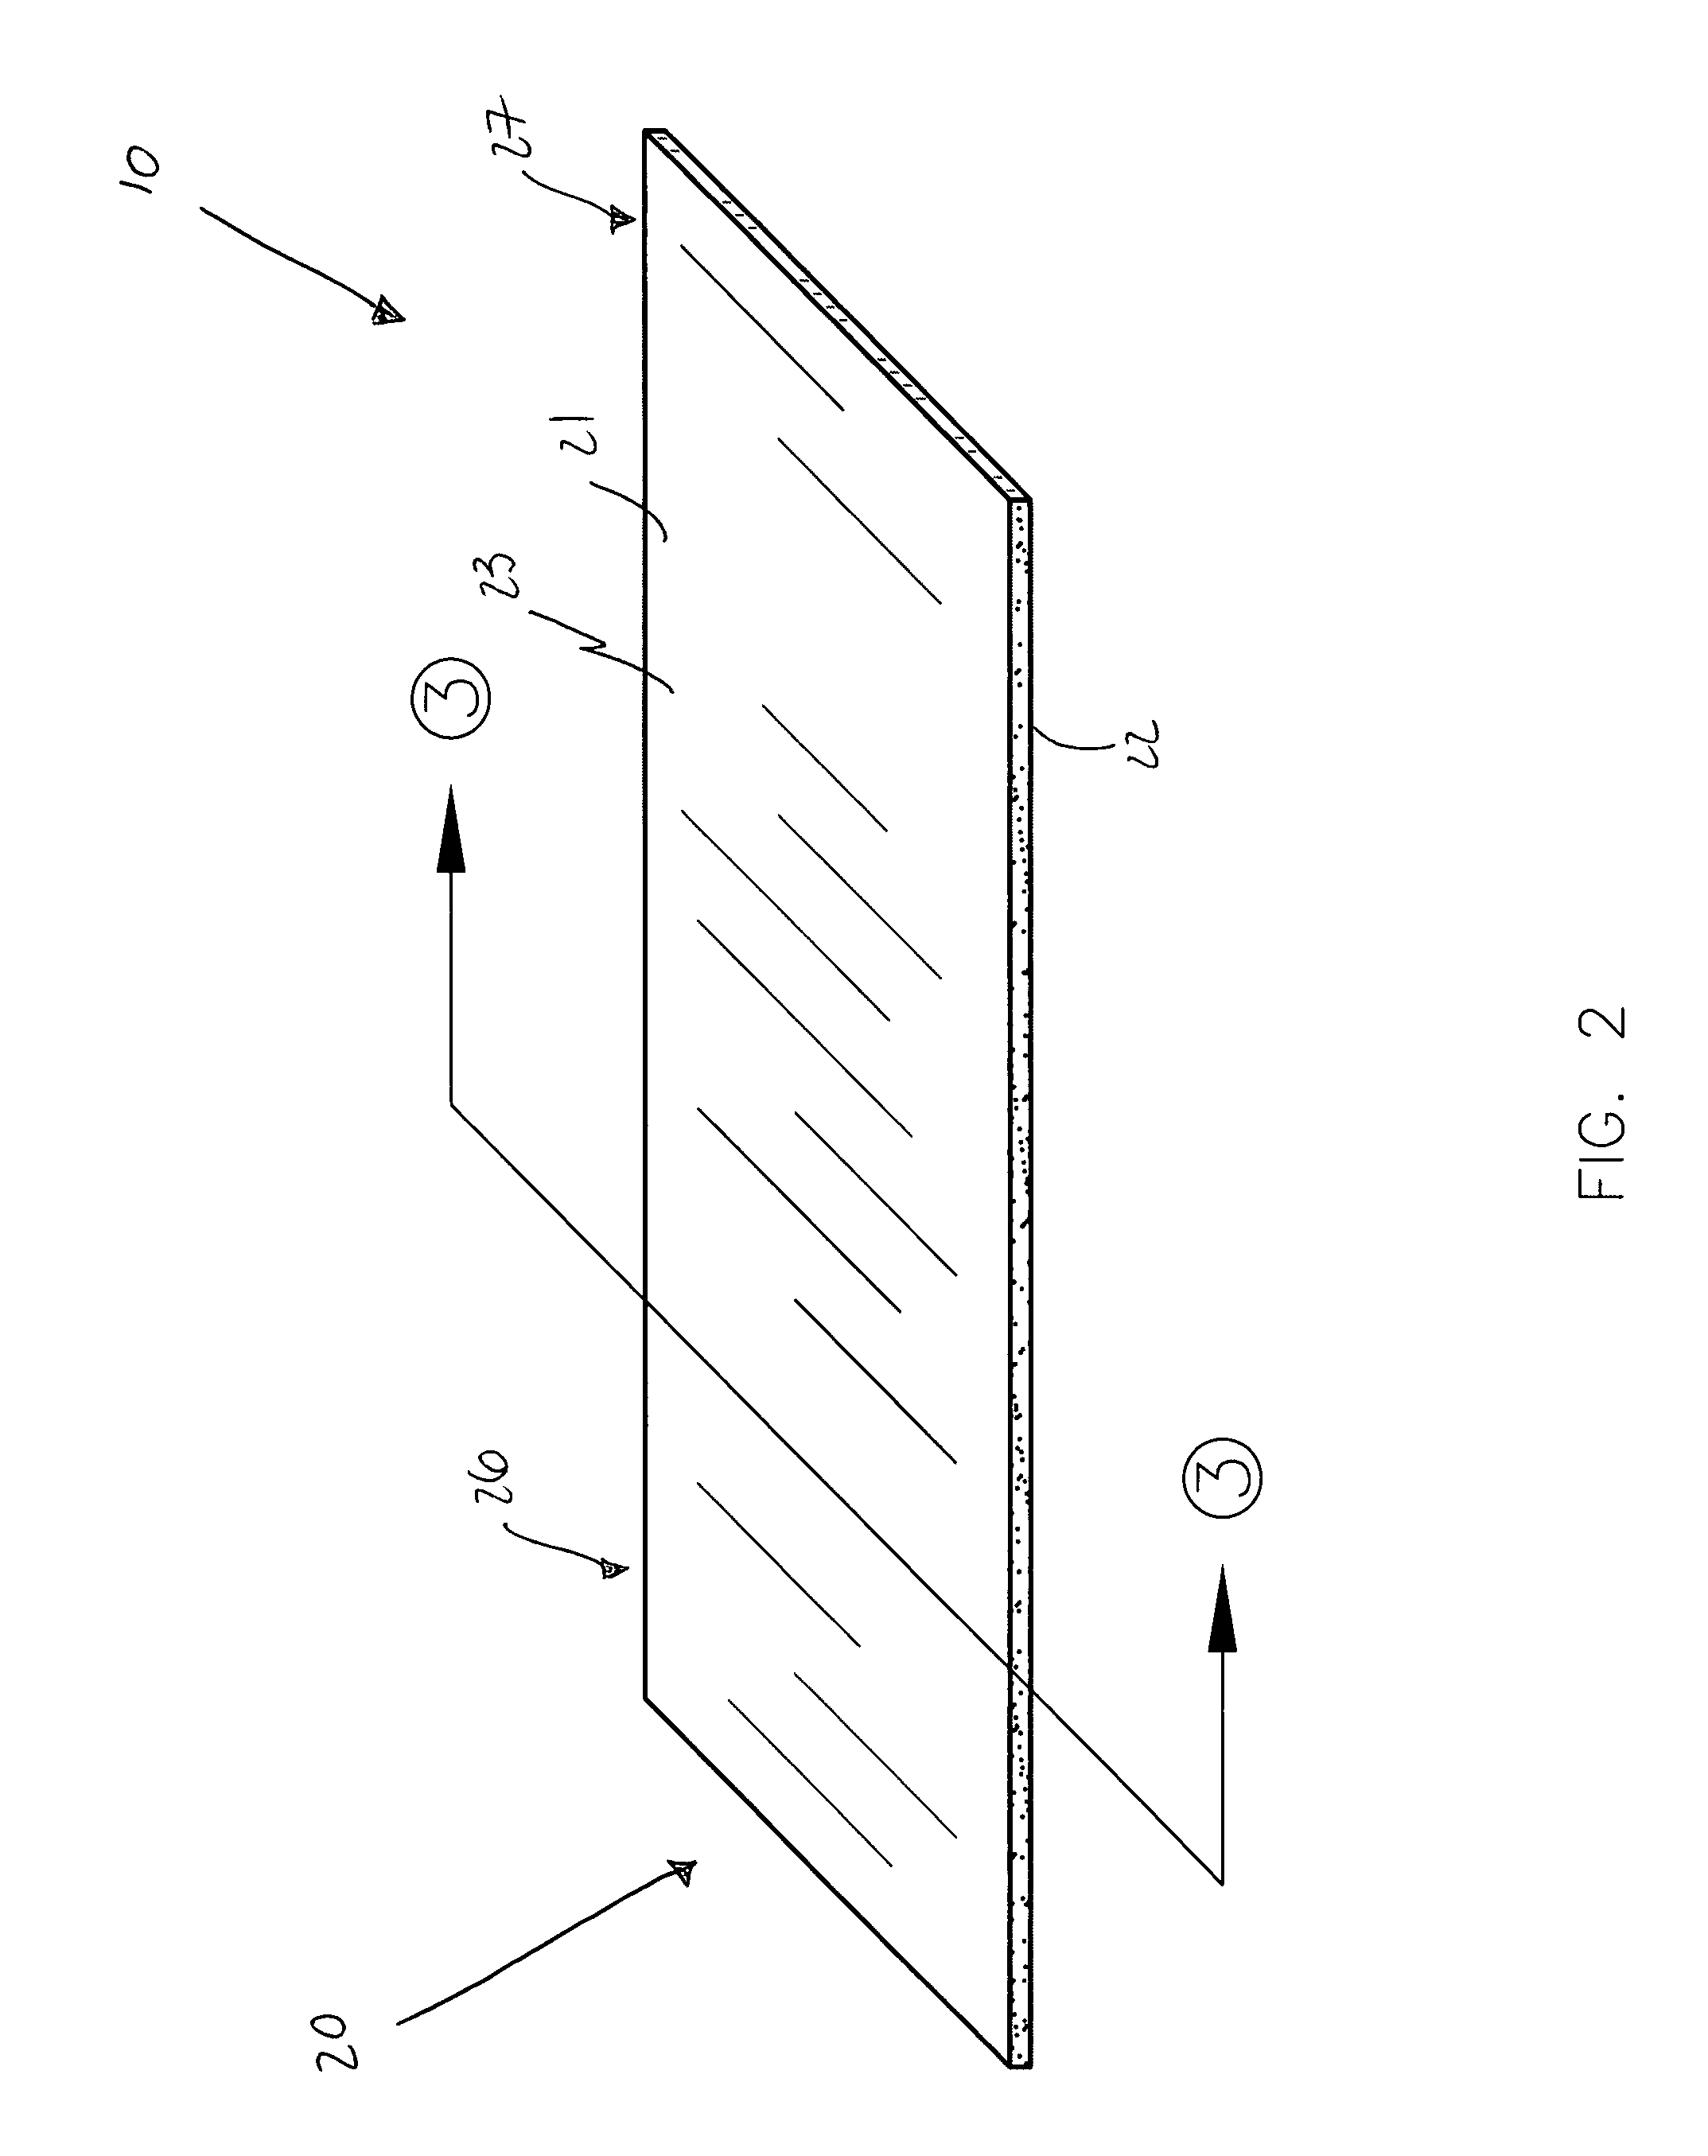 Disposable absorbent liner for use with refrigerator drawers and associated method